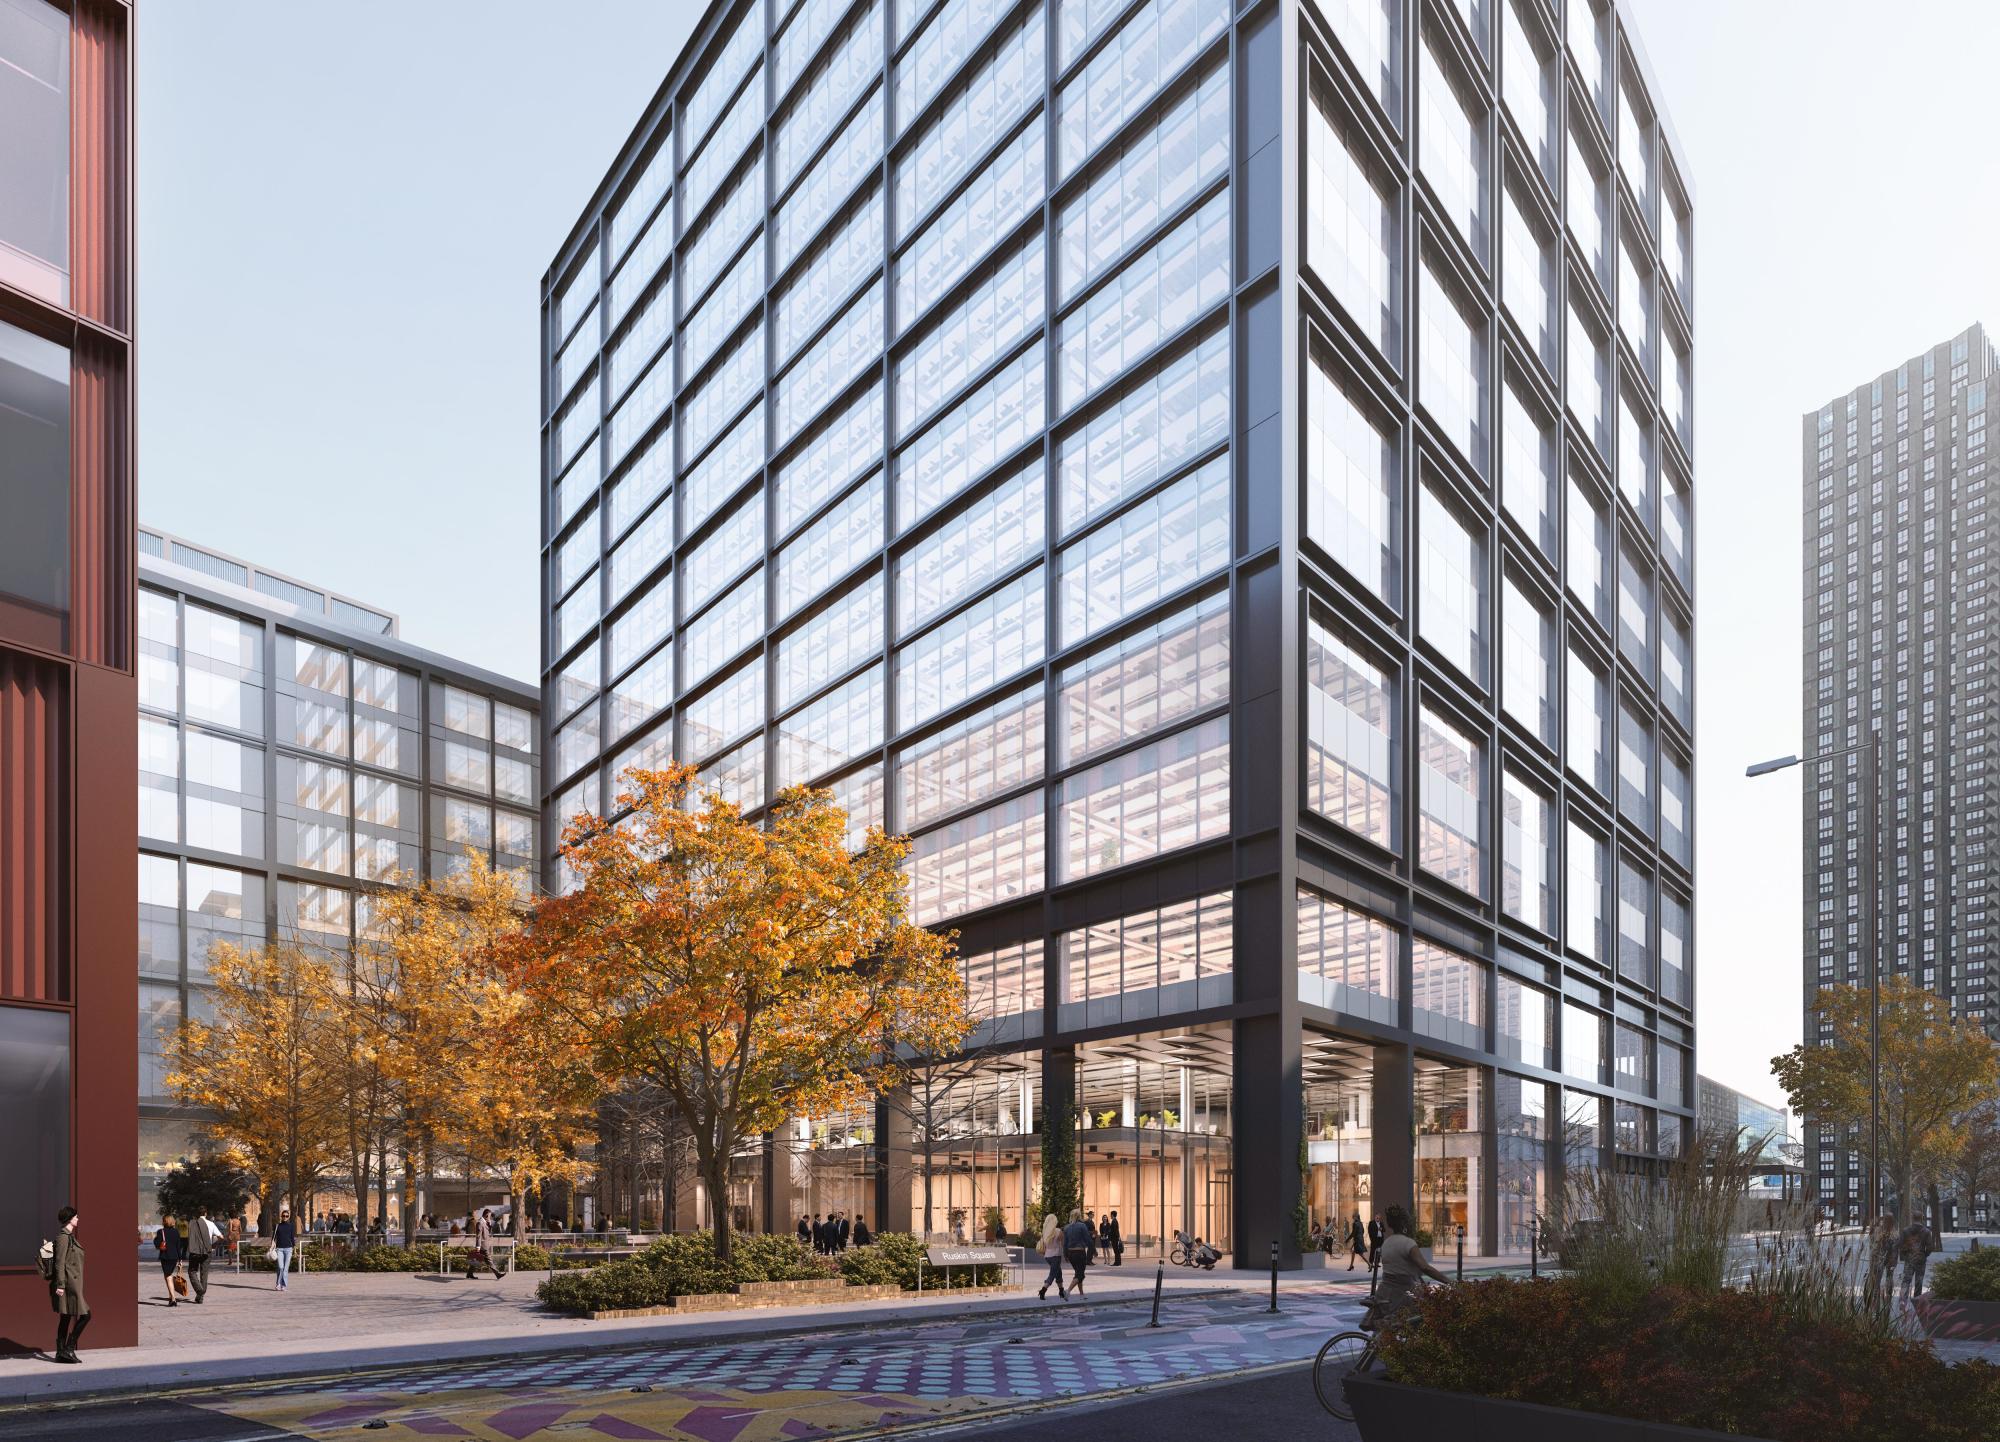 Schroders Capital Obtains Planning Consent for 3 Ruskin Square